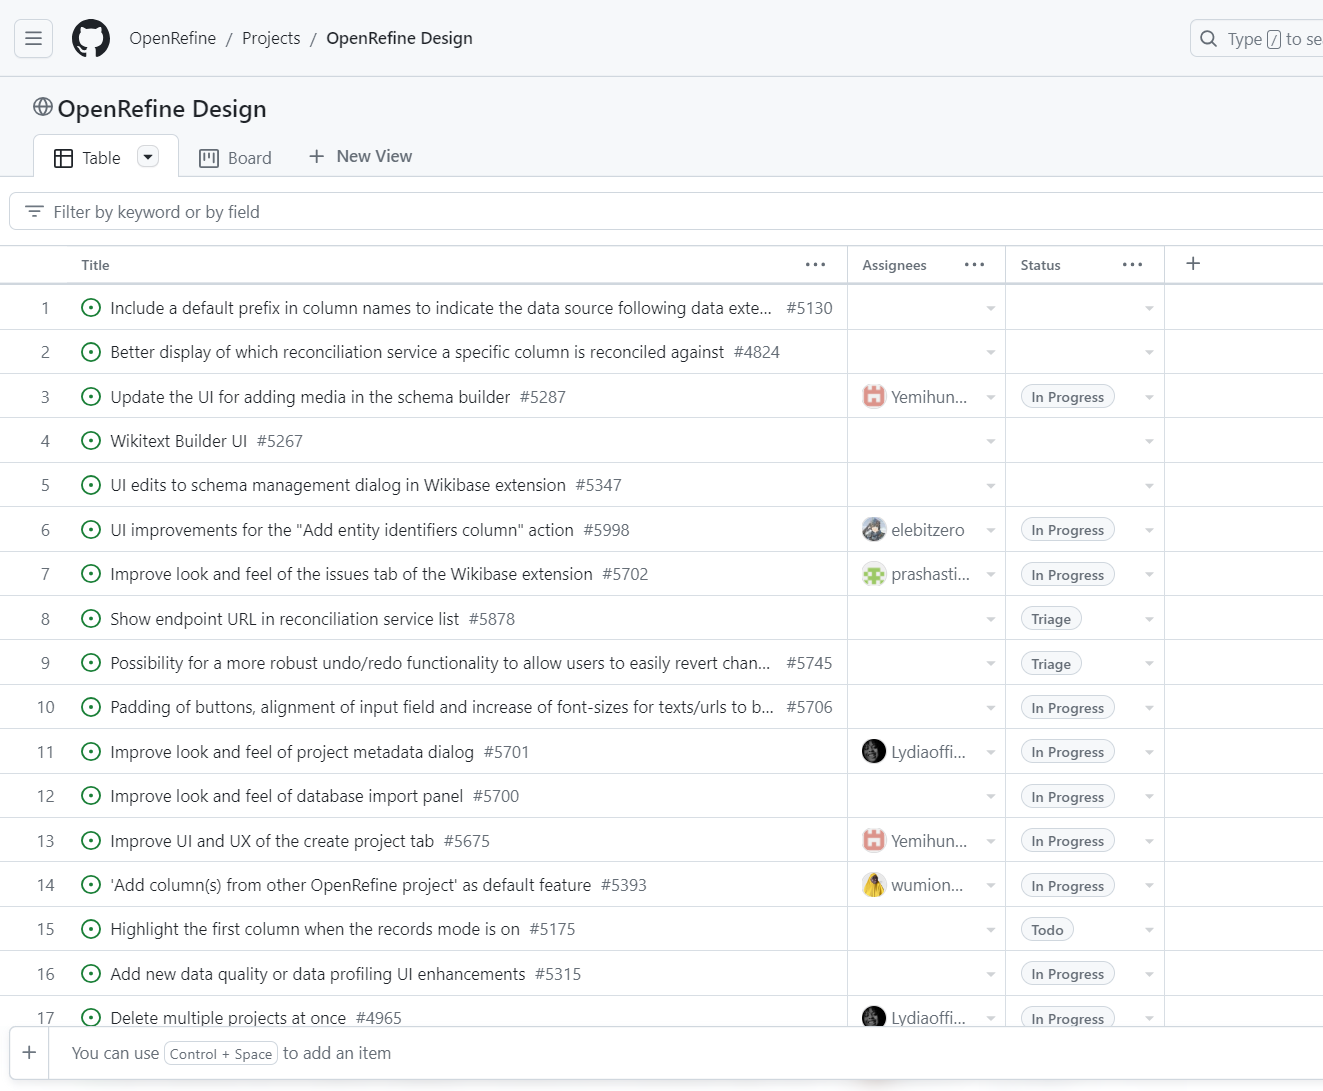 This screenshot shows the OpenRefine design project in list view